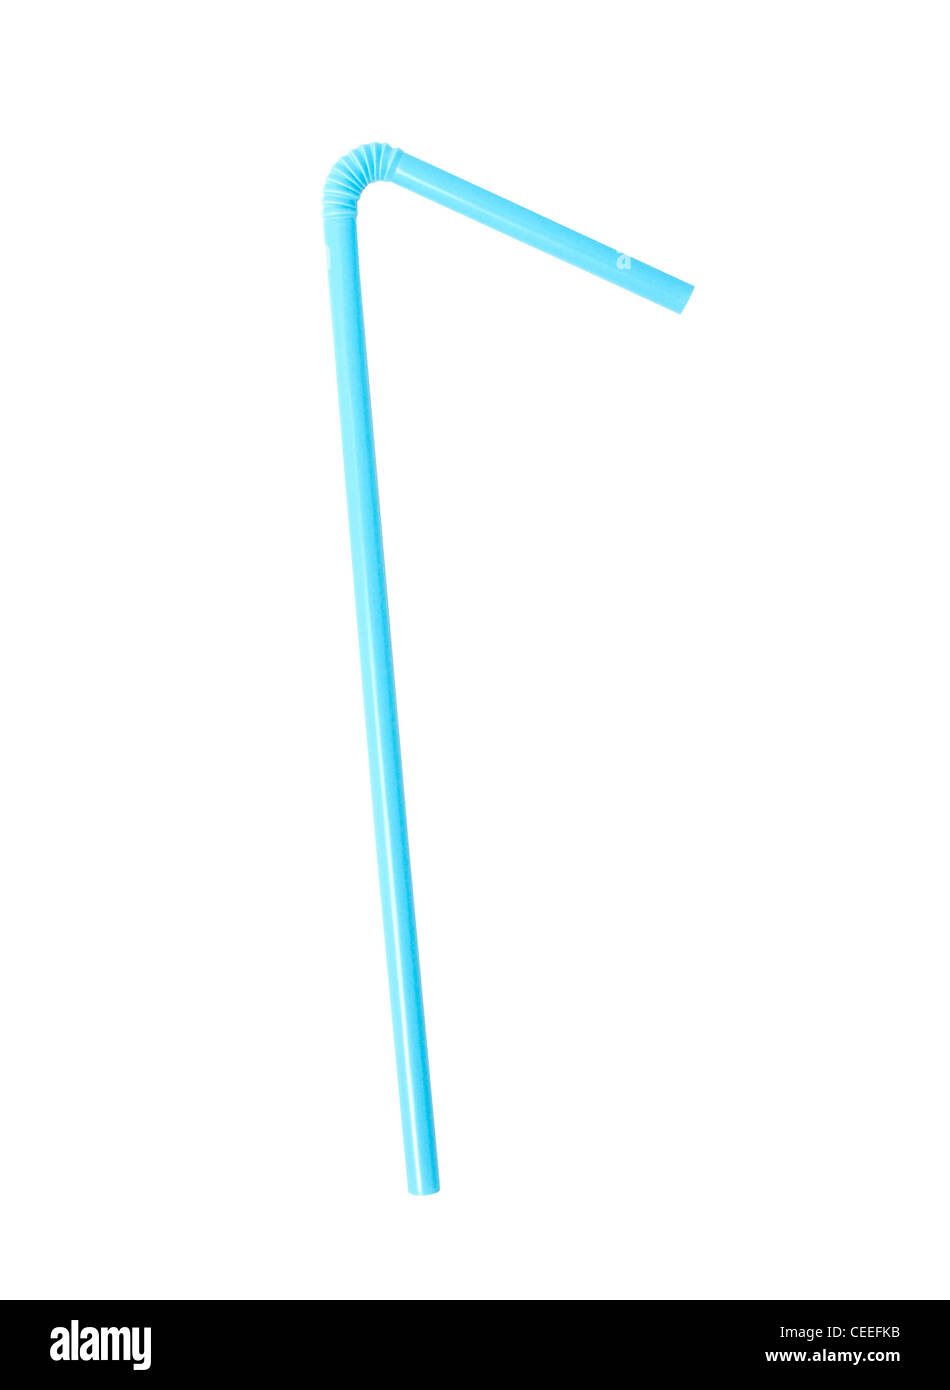 Blue party straw Stock Photo